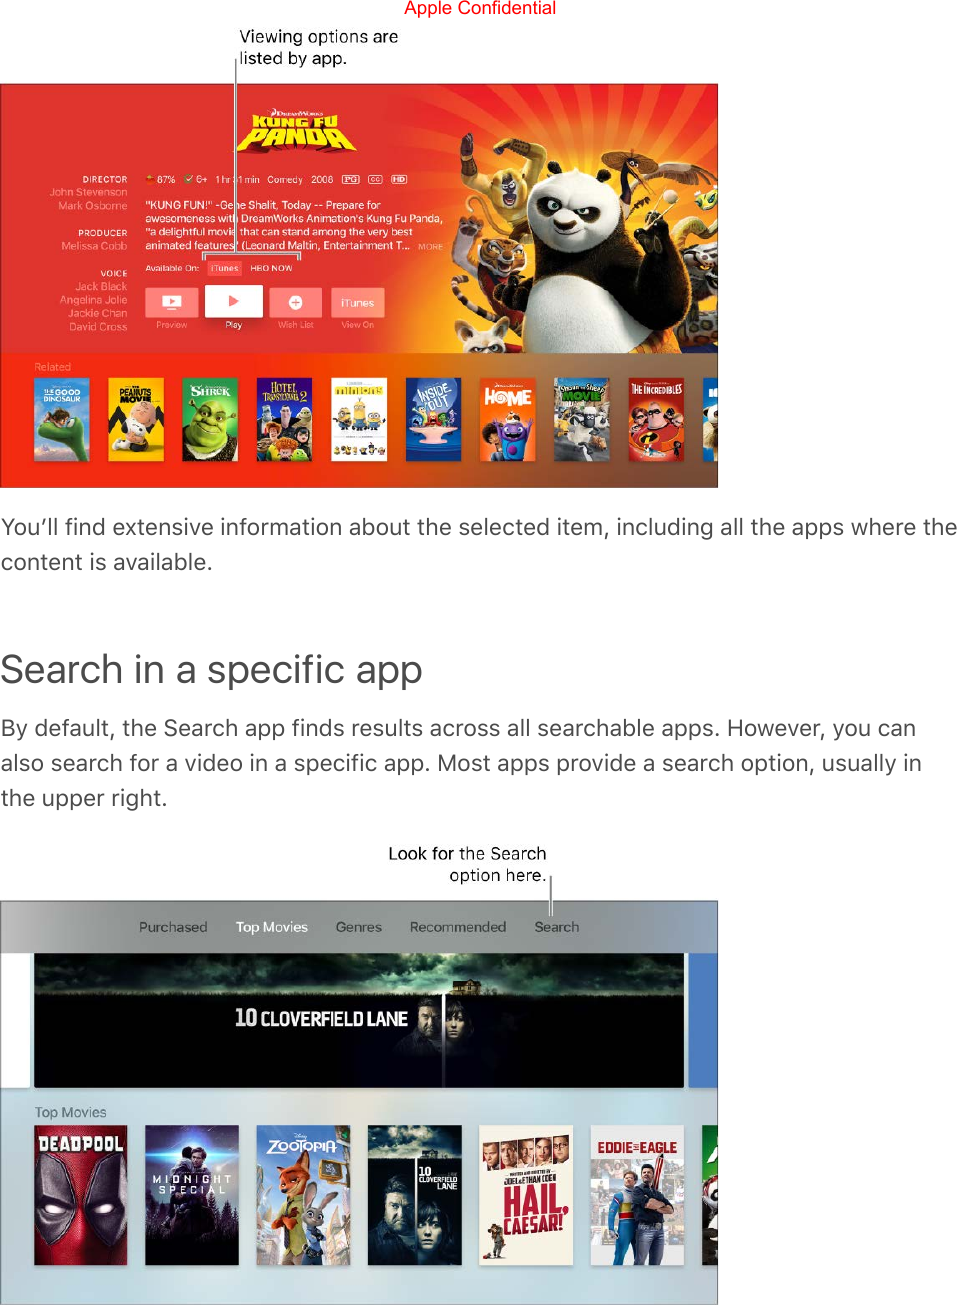 Youʼll find extensive information about the selected item, including all the apps where thecontent is available.Search in a specific appBy default, the Search app finds results across all searchable apps. However, you canalso search for a video in a specific app. Most apps provide a search option, usually inthe upper right.Apple Confidential